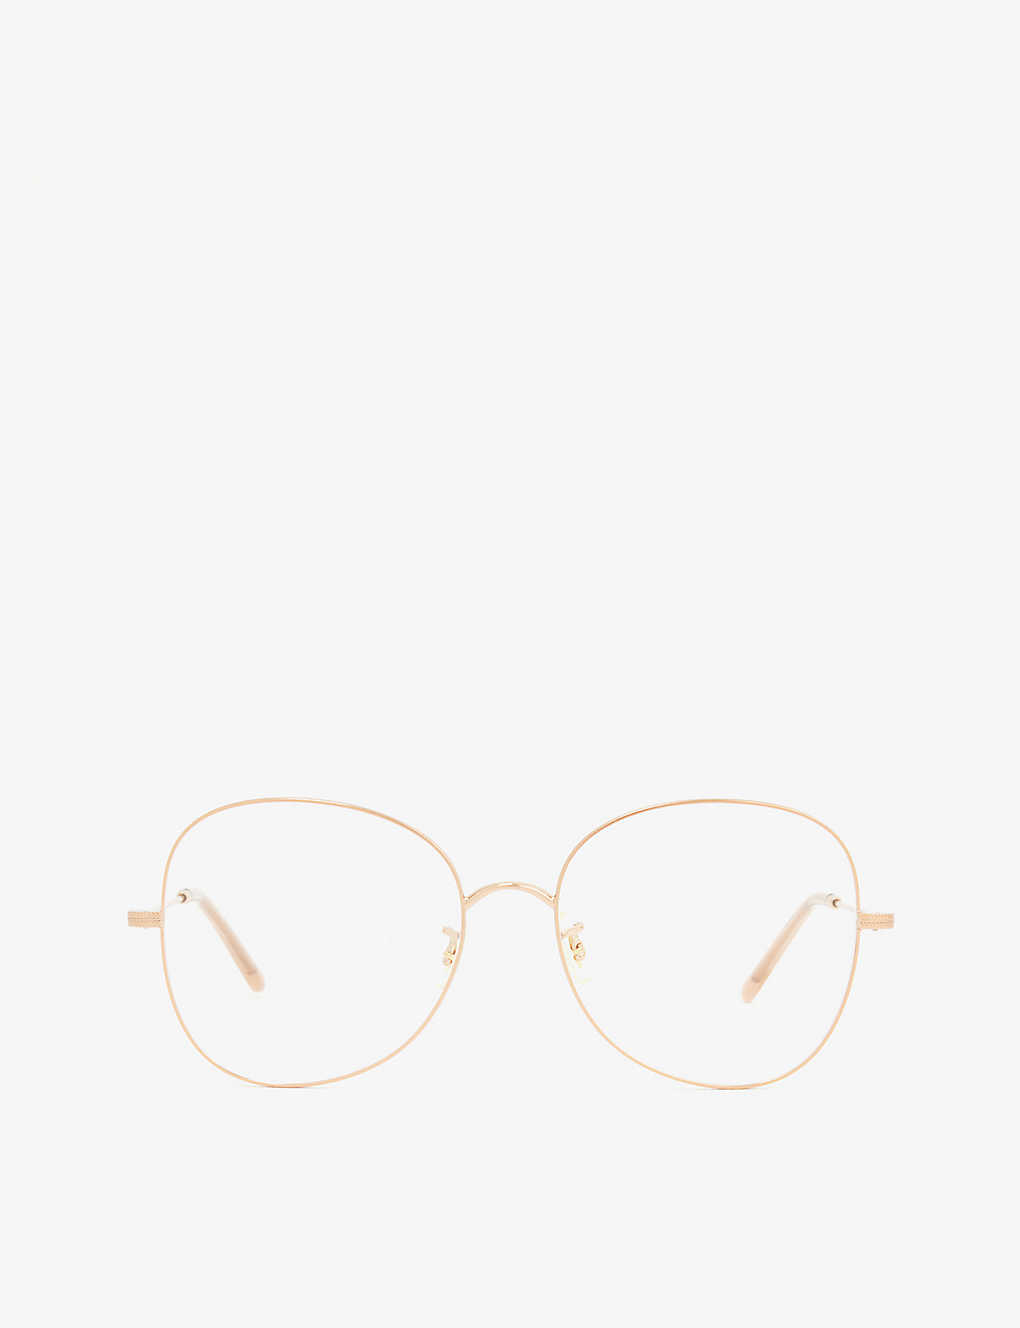 Oliver Peoples Womens Pink Ov1313 Butterfly-frame Steel Optical Glasses